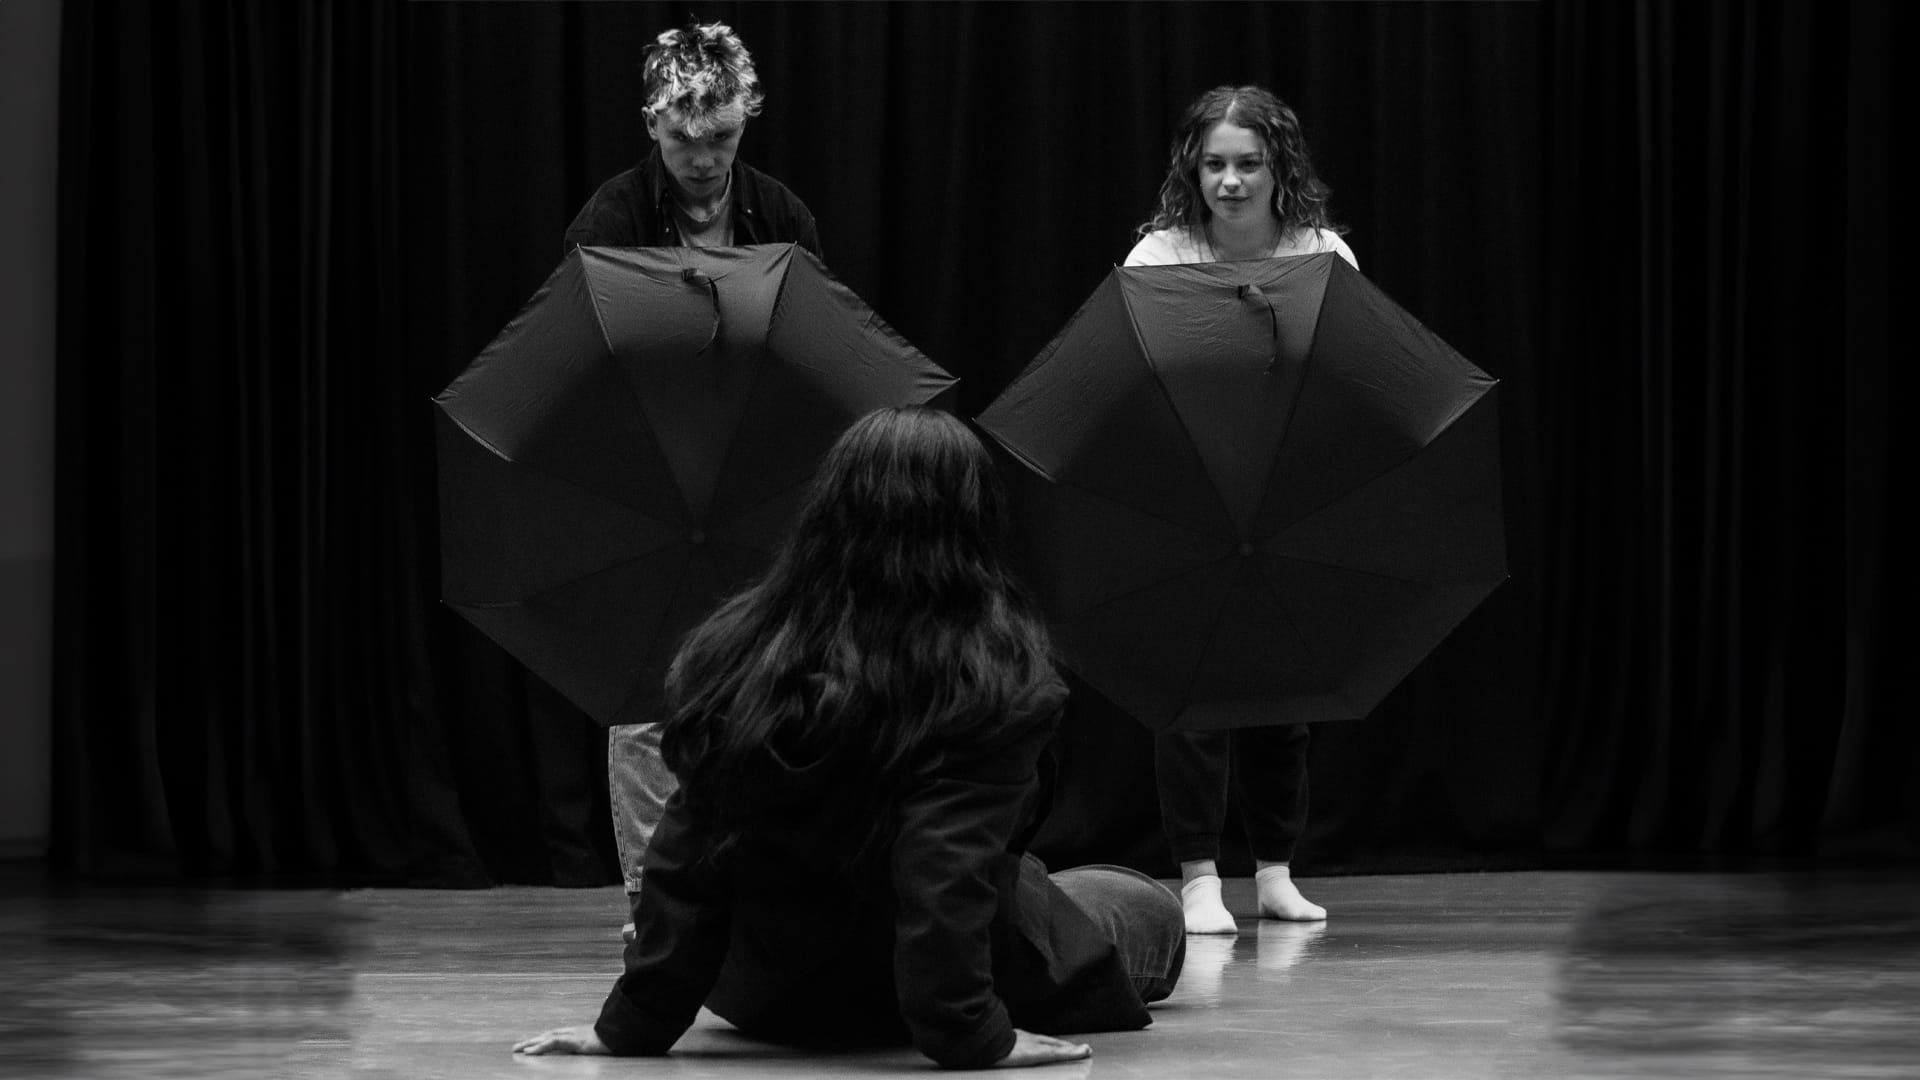 Alice Rehearsal Photo: monochrome; an actor with long dark sits on the floor with her hands braced against it behind her, facing away from the camera; two other young actors tower over her, each holding an opened umbrella like a shield towards the camera.